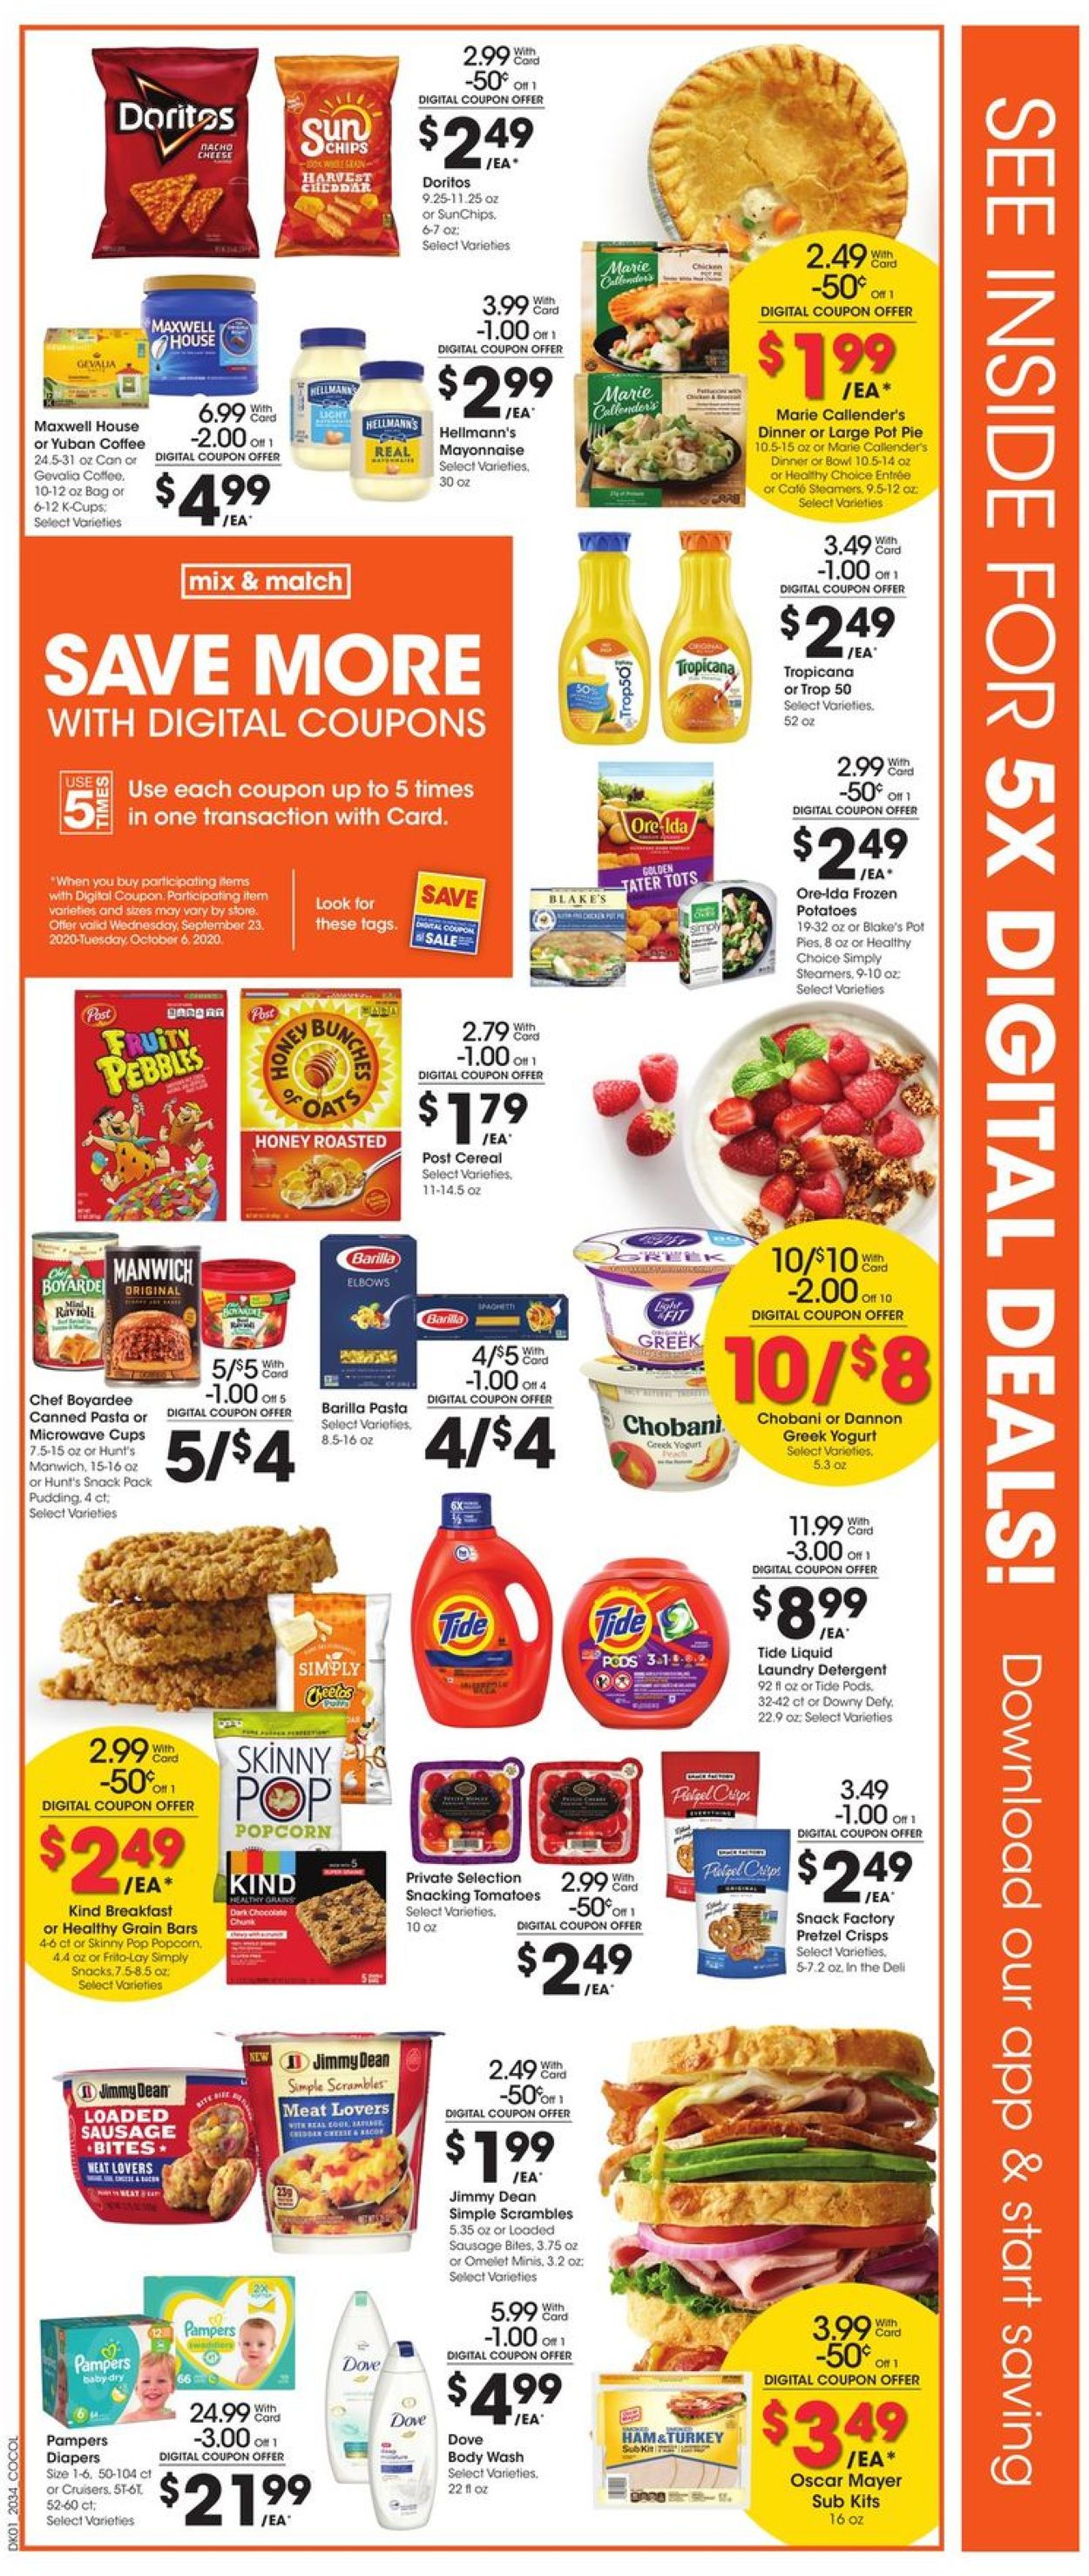 Catalogue Kroger from 09/23/2020